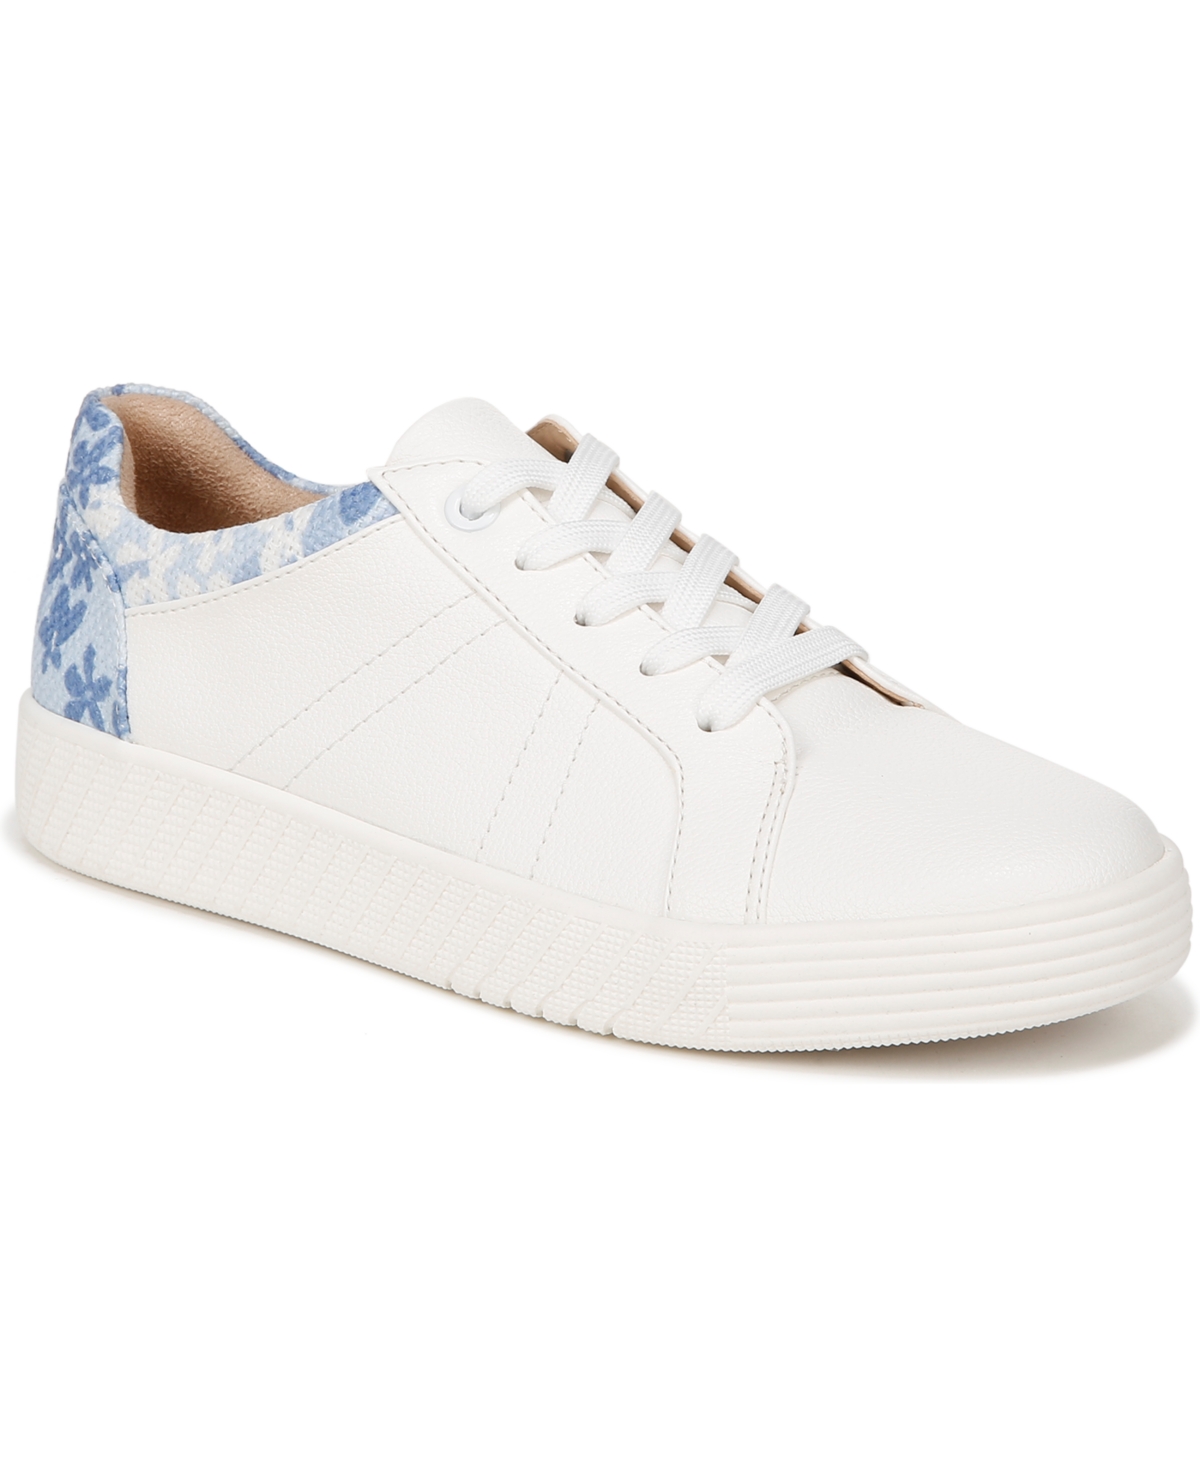 Neela Sneakers - White/Bluebell Faux Leather/Canvas